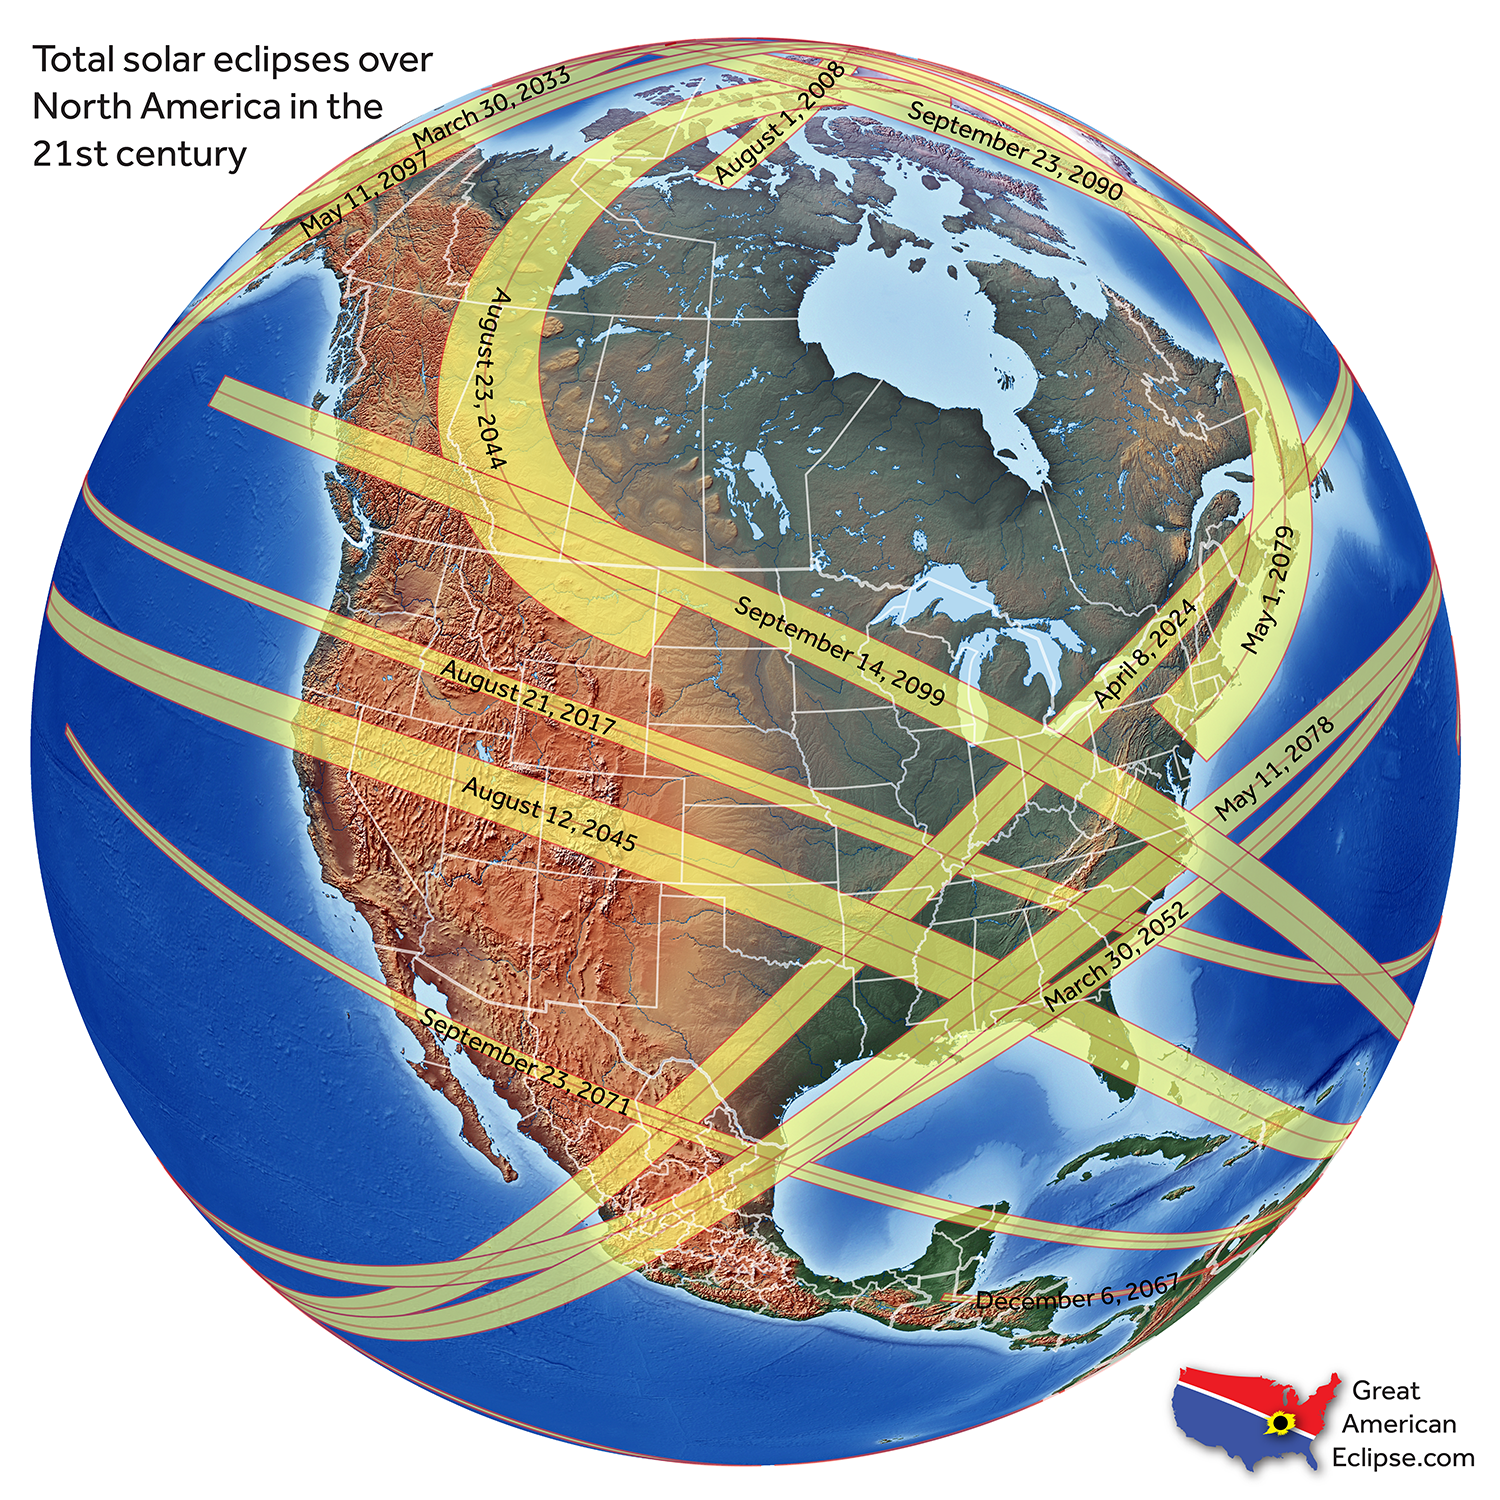 CREDIT: www.greatamericaneclipse.com - All the total solar eclipses across North America during the 21st century.